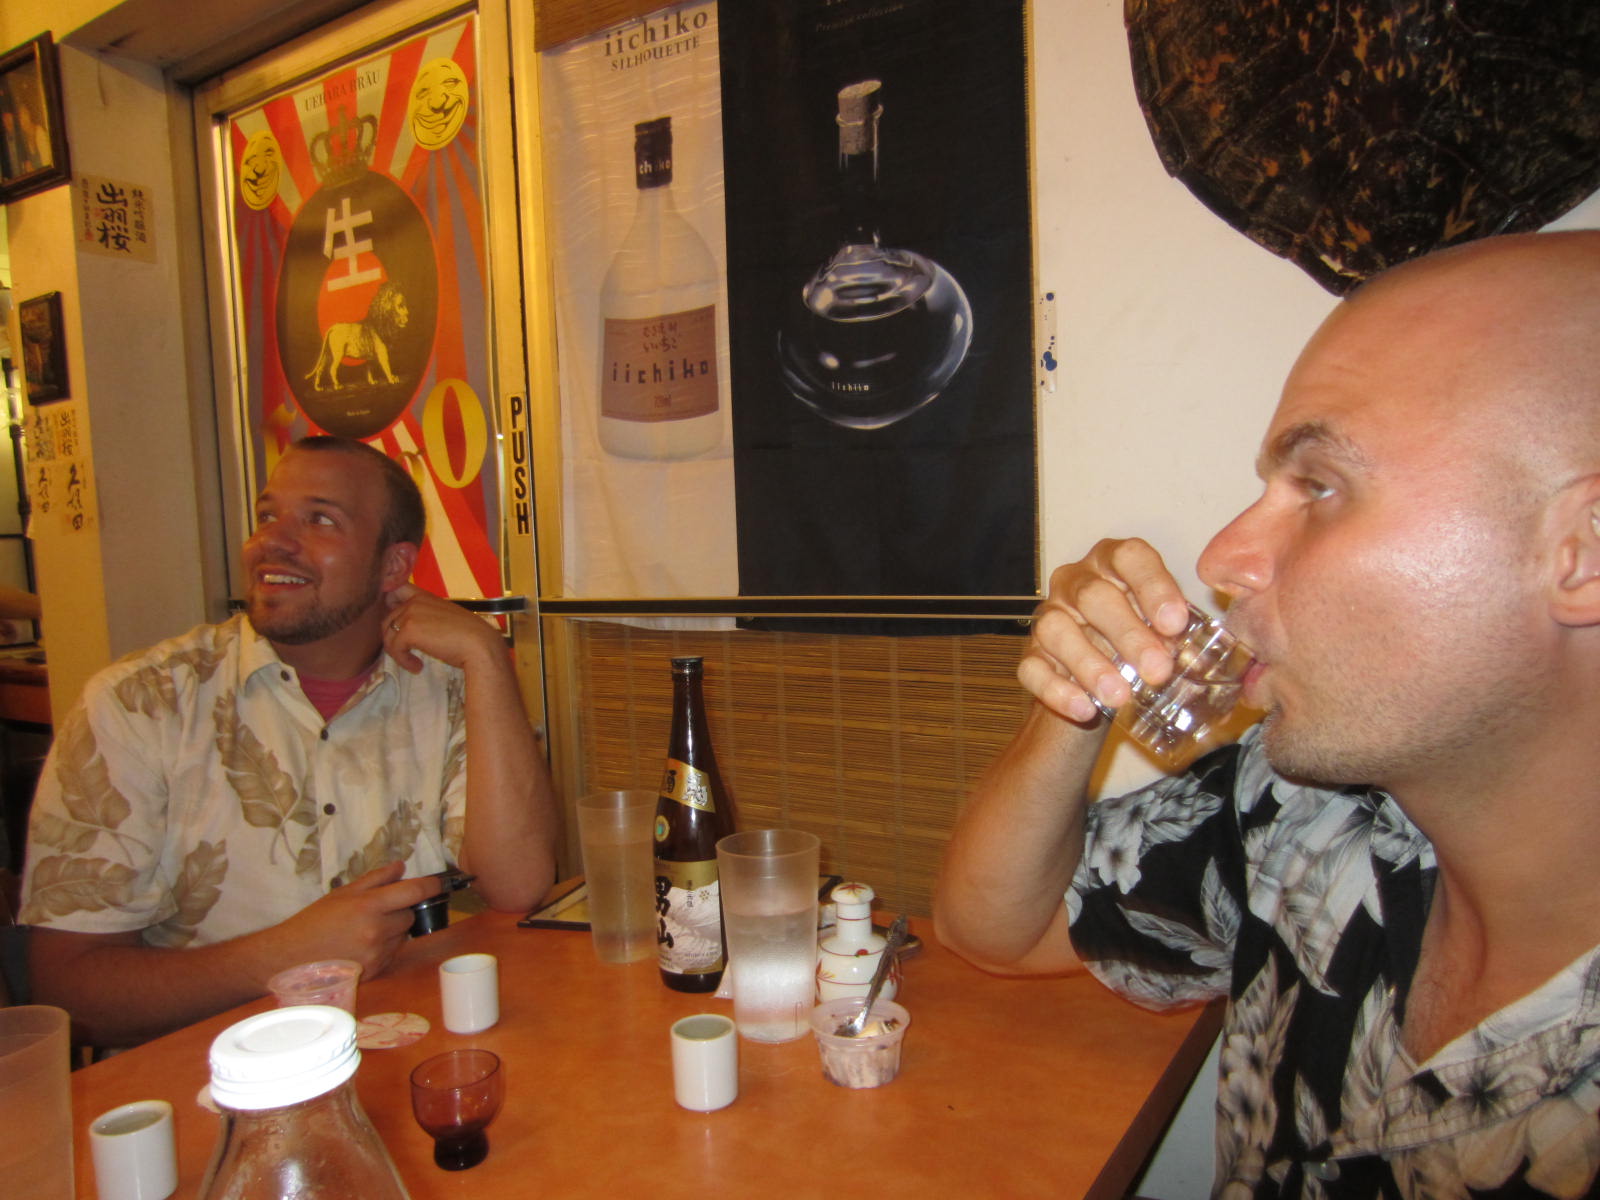 two men are enjoying some alcohol at a restaurant